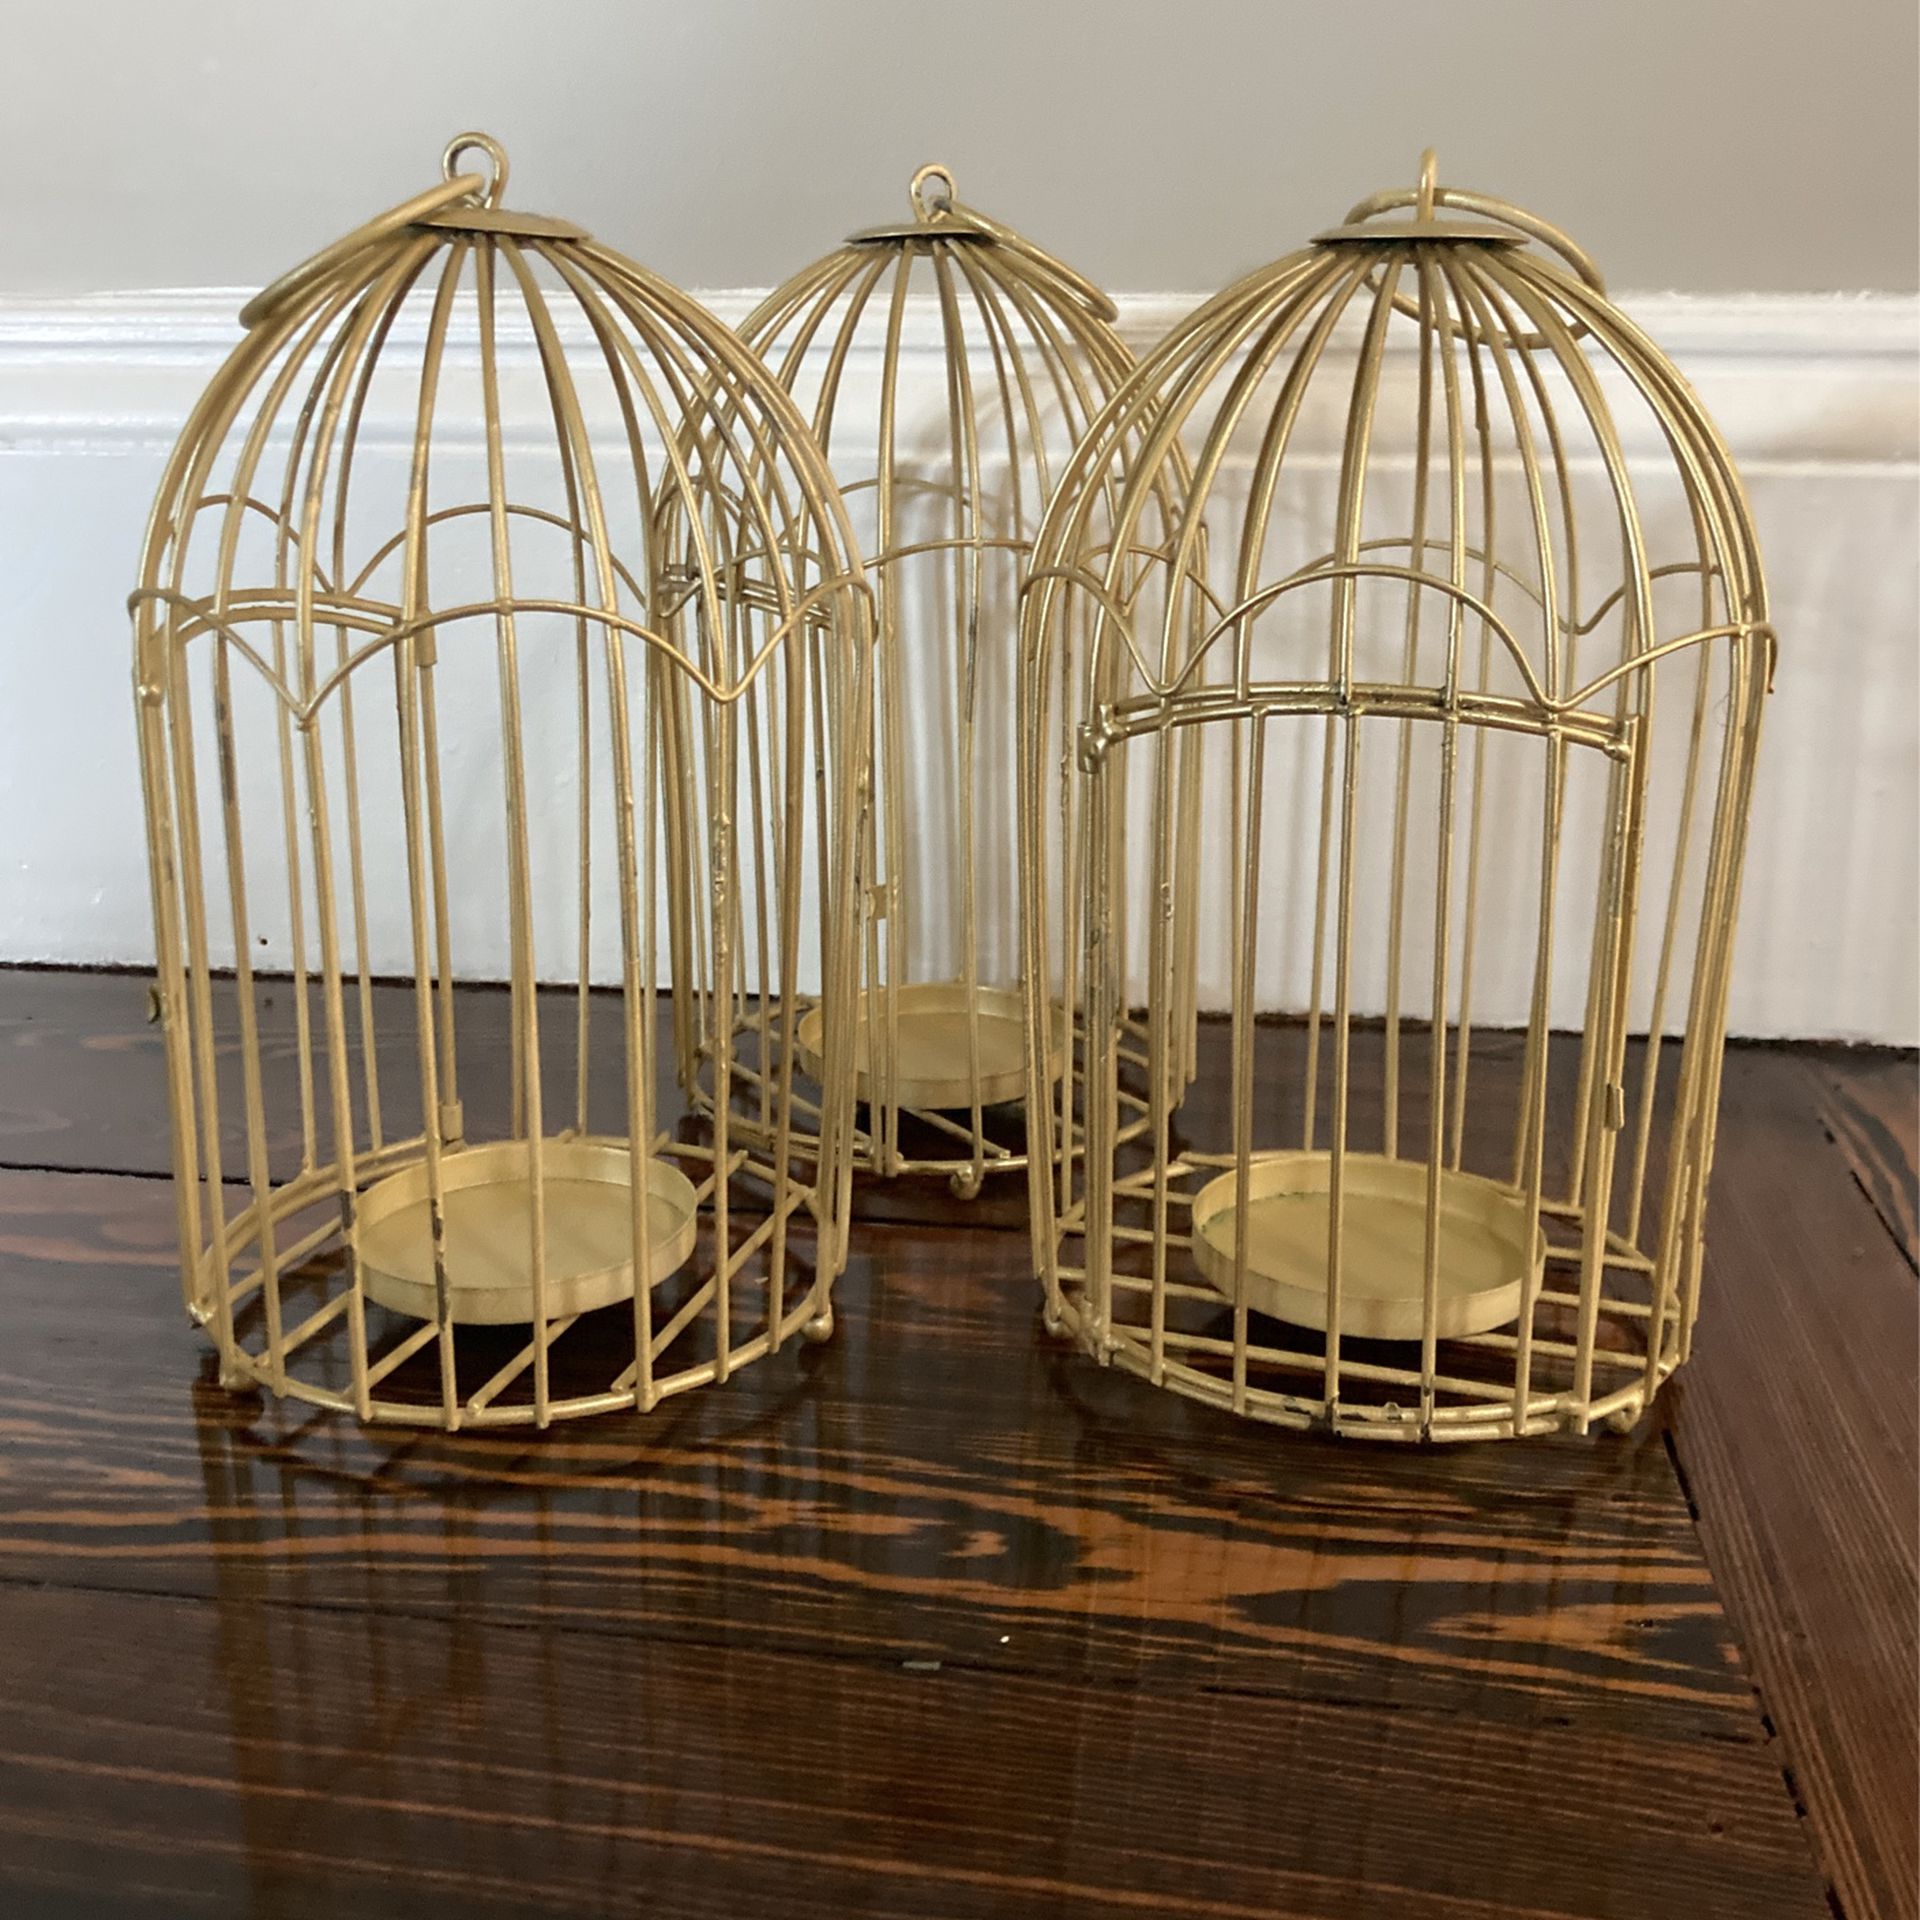 Gold Decorative Bird Cages With Candle Holder